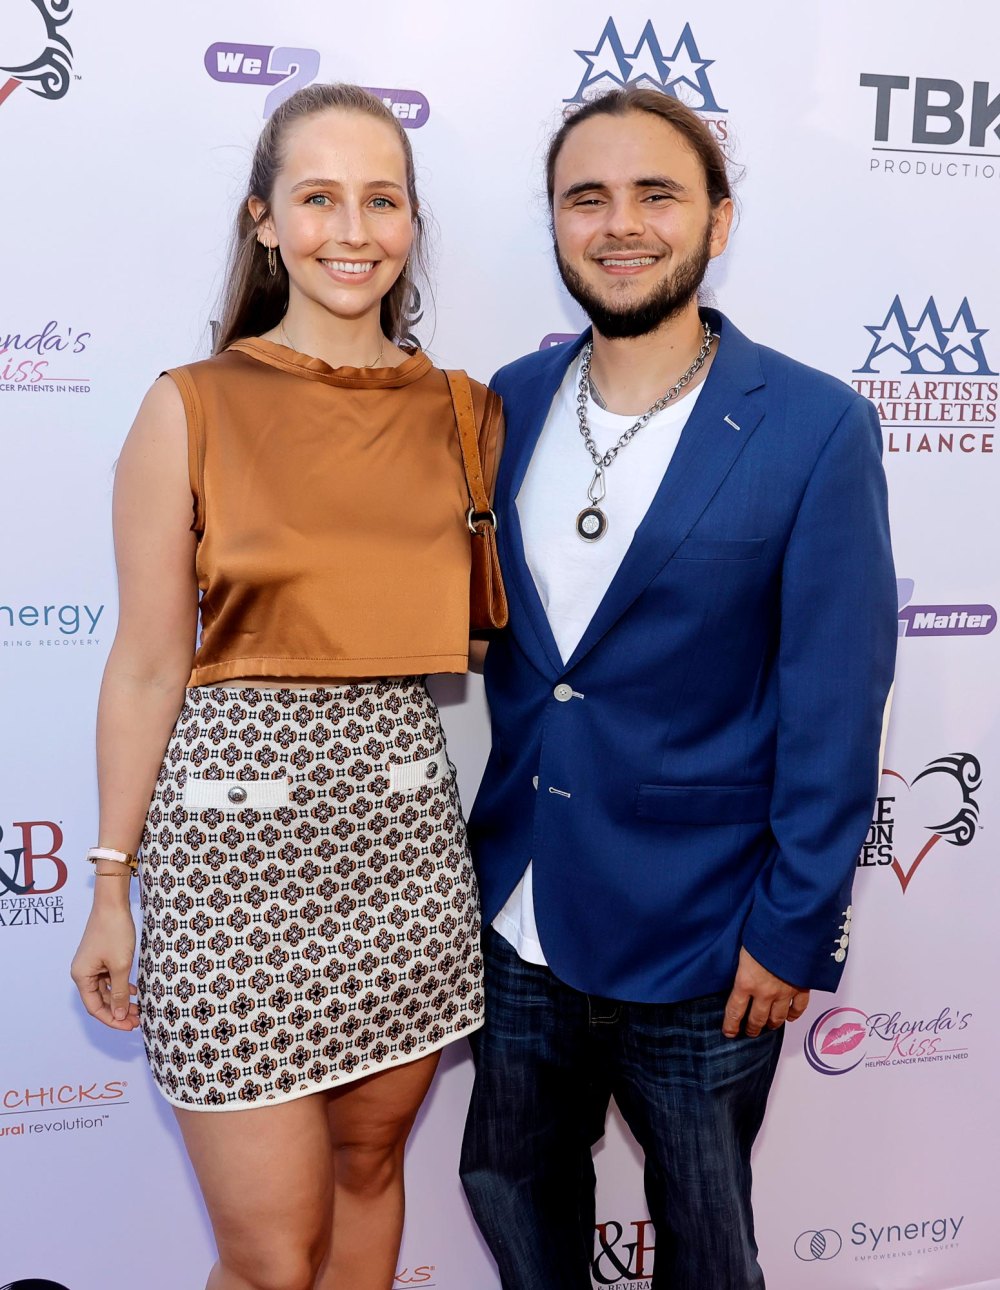 Prince Jackson and his long-time girlfriend Molly Schirmang are dating well, with no plans for an engagement 622